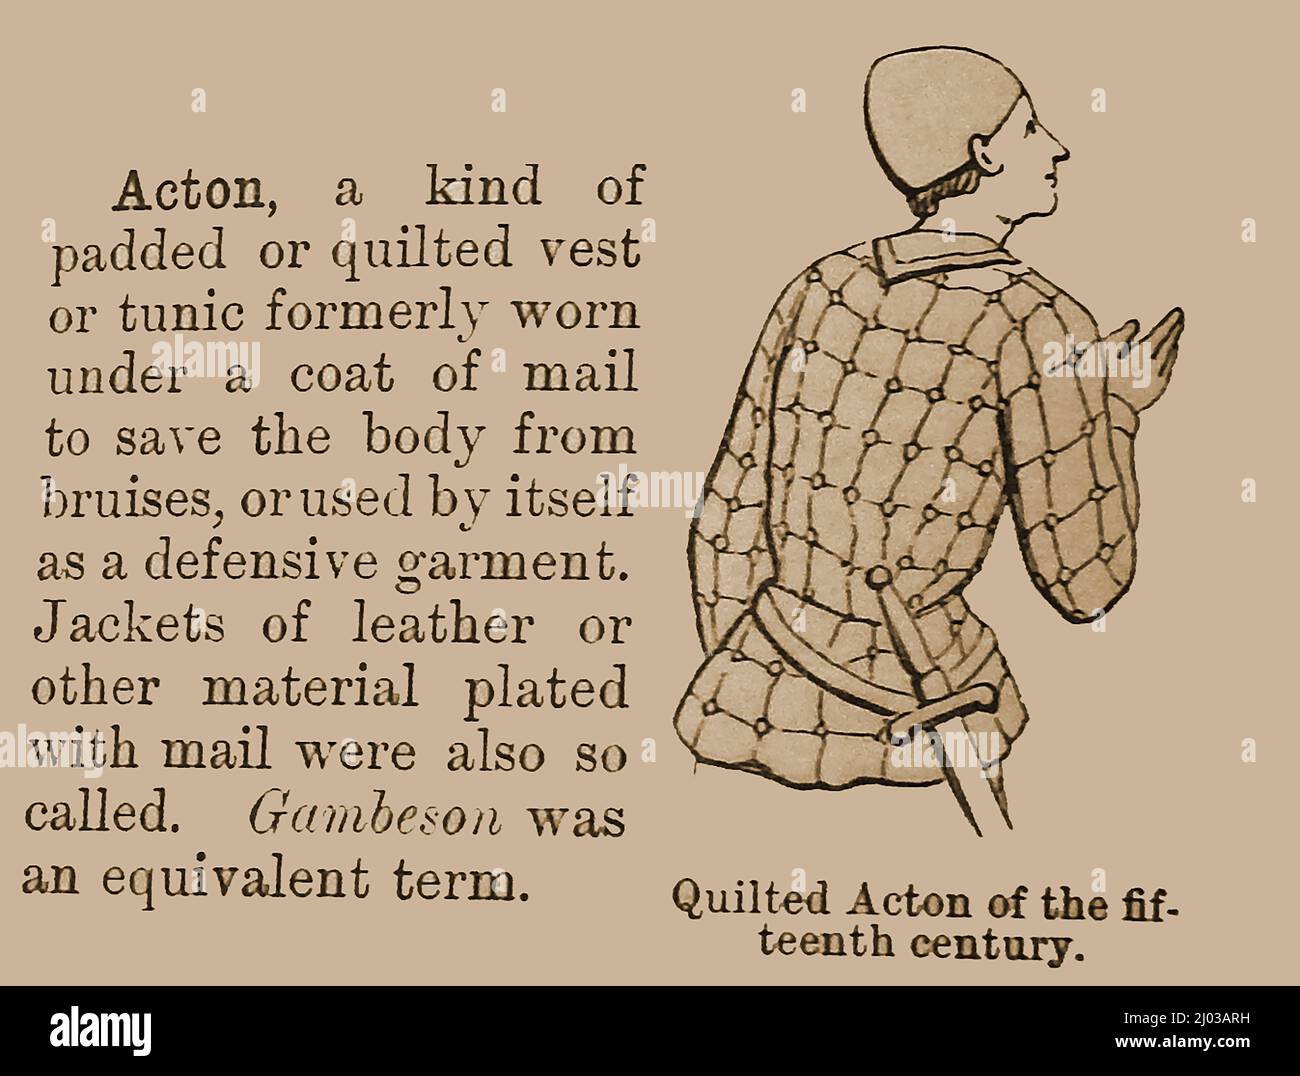 A Victorian illustration and description of a British  15th century Acton or Gambeson, a padded jacket originally designed to be worn under a suit of armour, Other versions were made to wear under chainmail or were themselves woven with chainmail within the fabric. Others  were made of leather or other defensive materials. Stock Photo